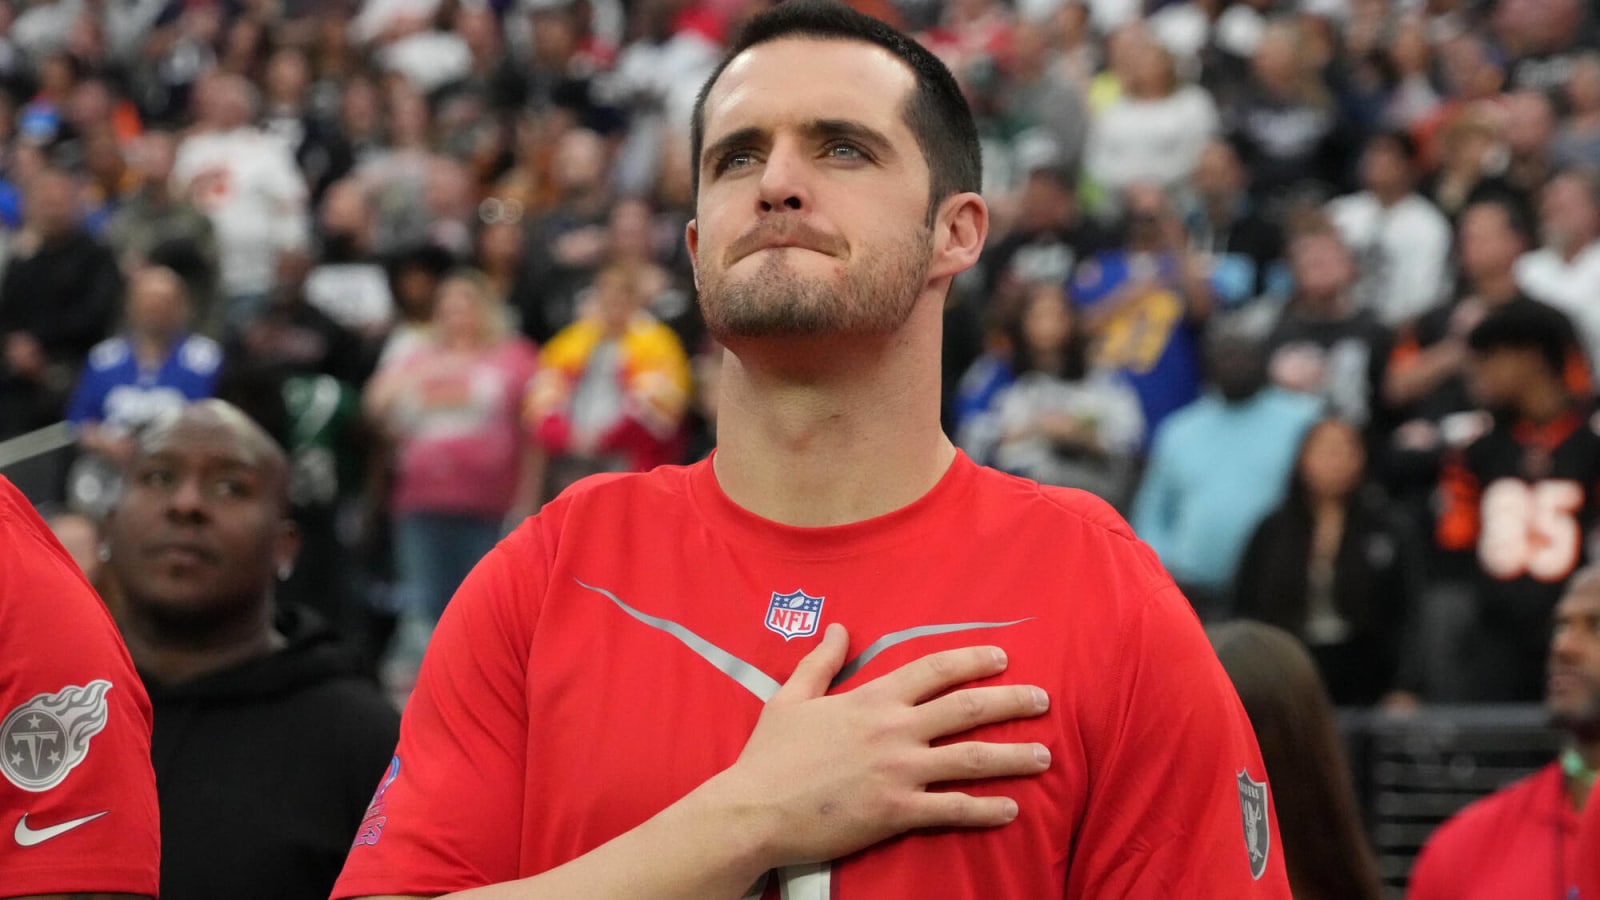 It’s official: Derek Carr has been cut from the Las Vegas Raiders